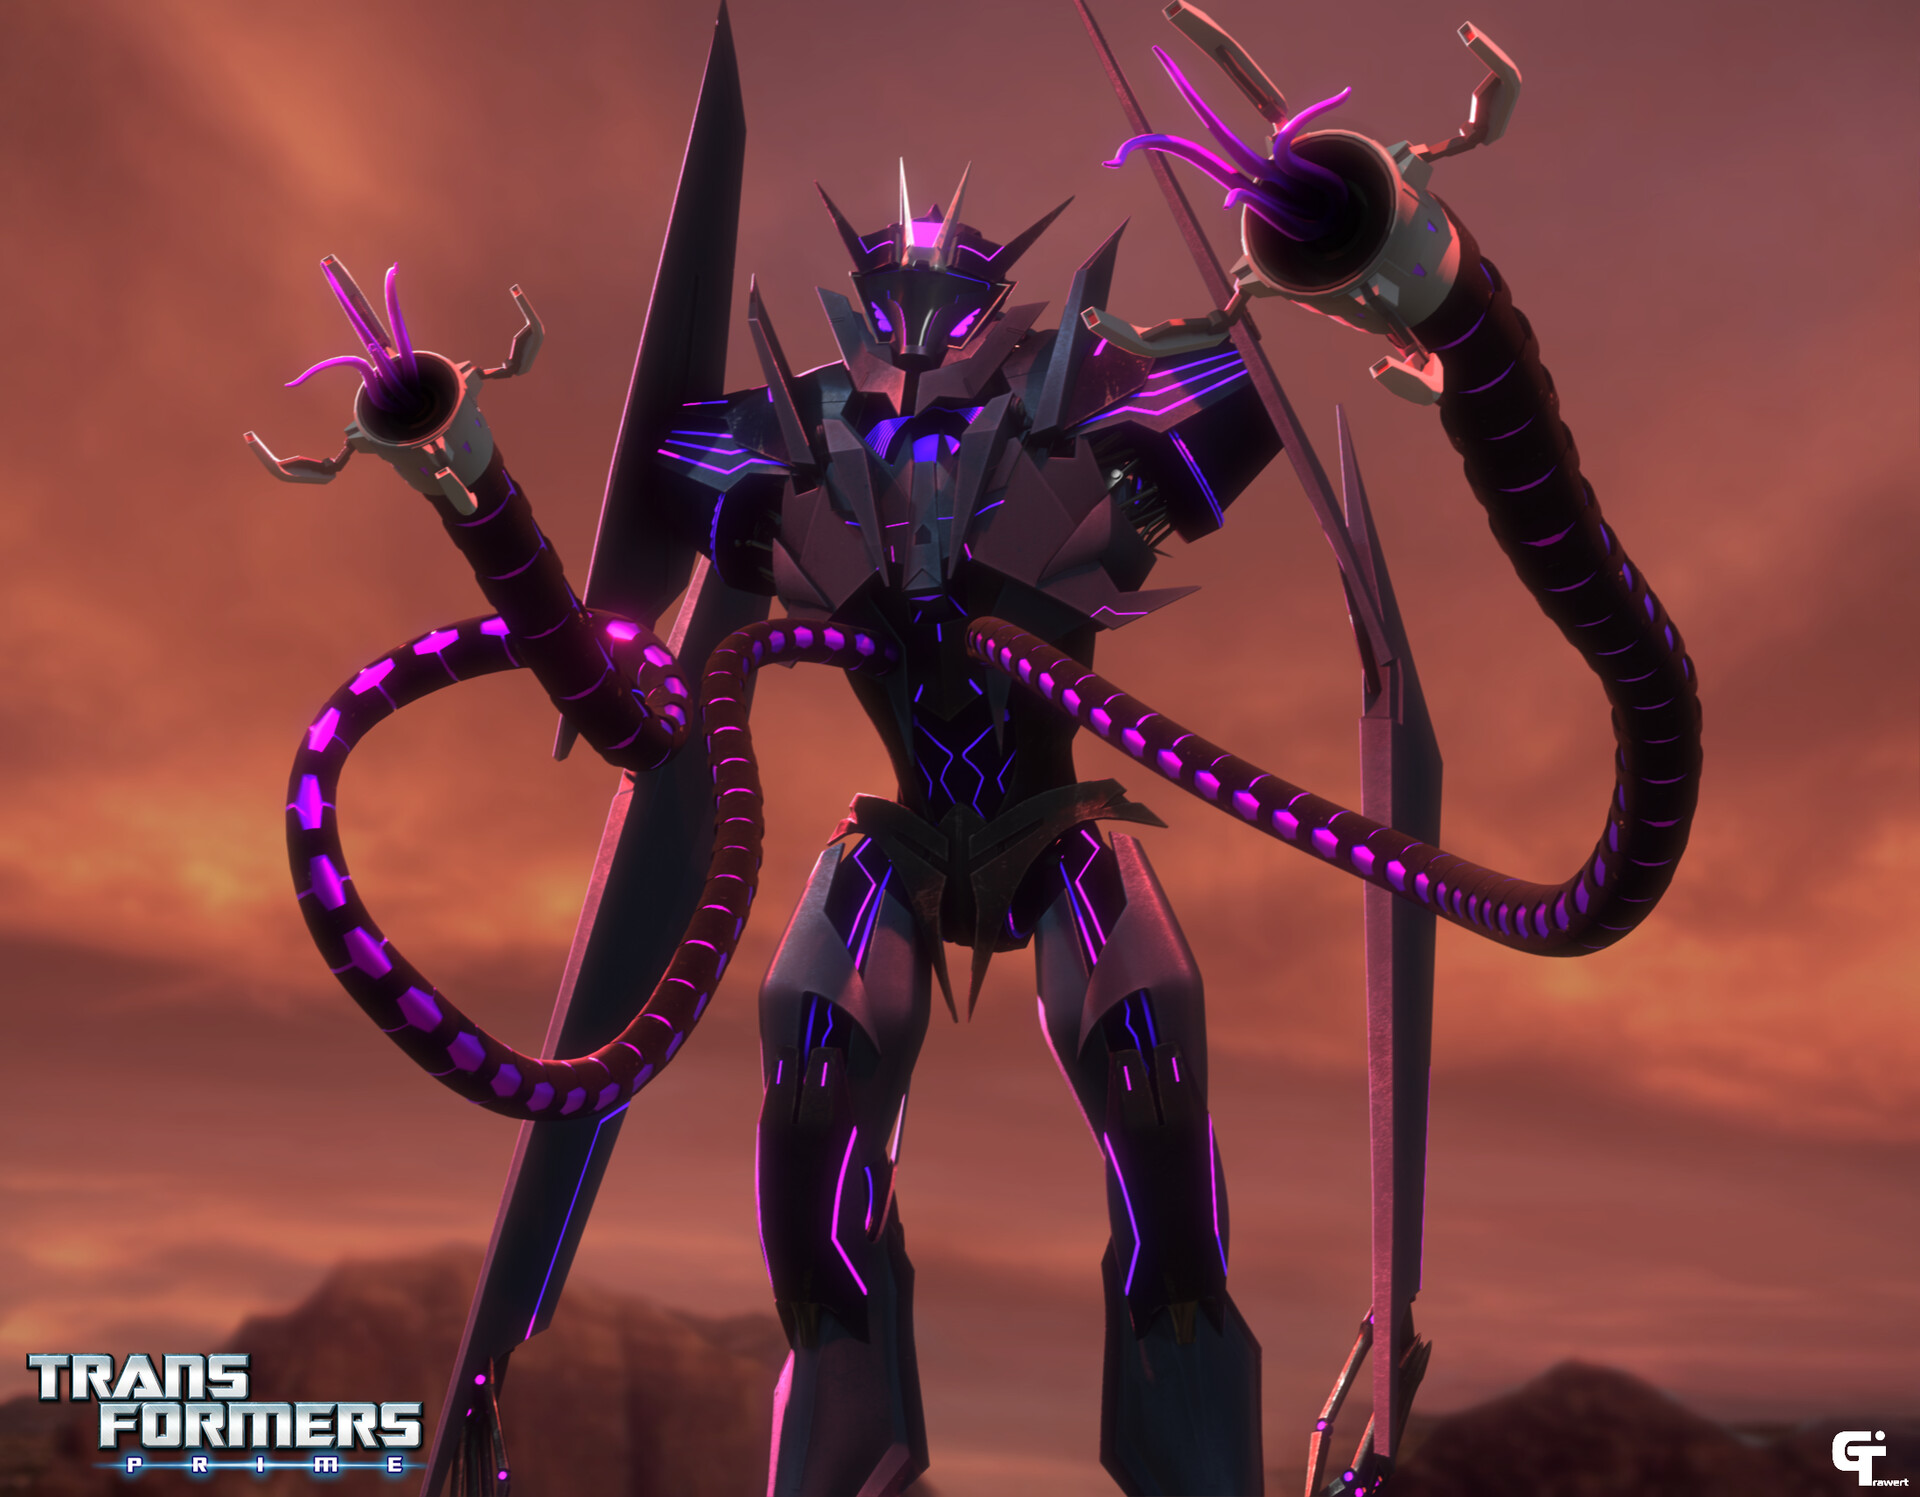 Soundwave from transformers with the transformers: prime design